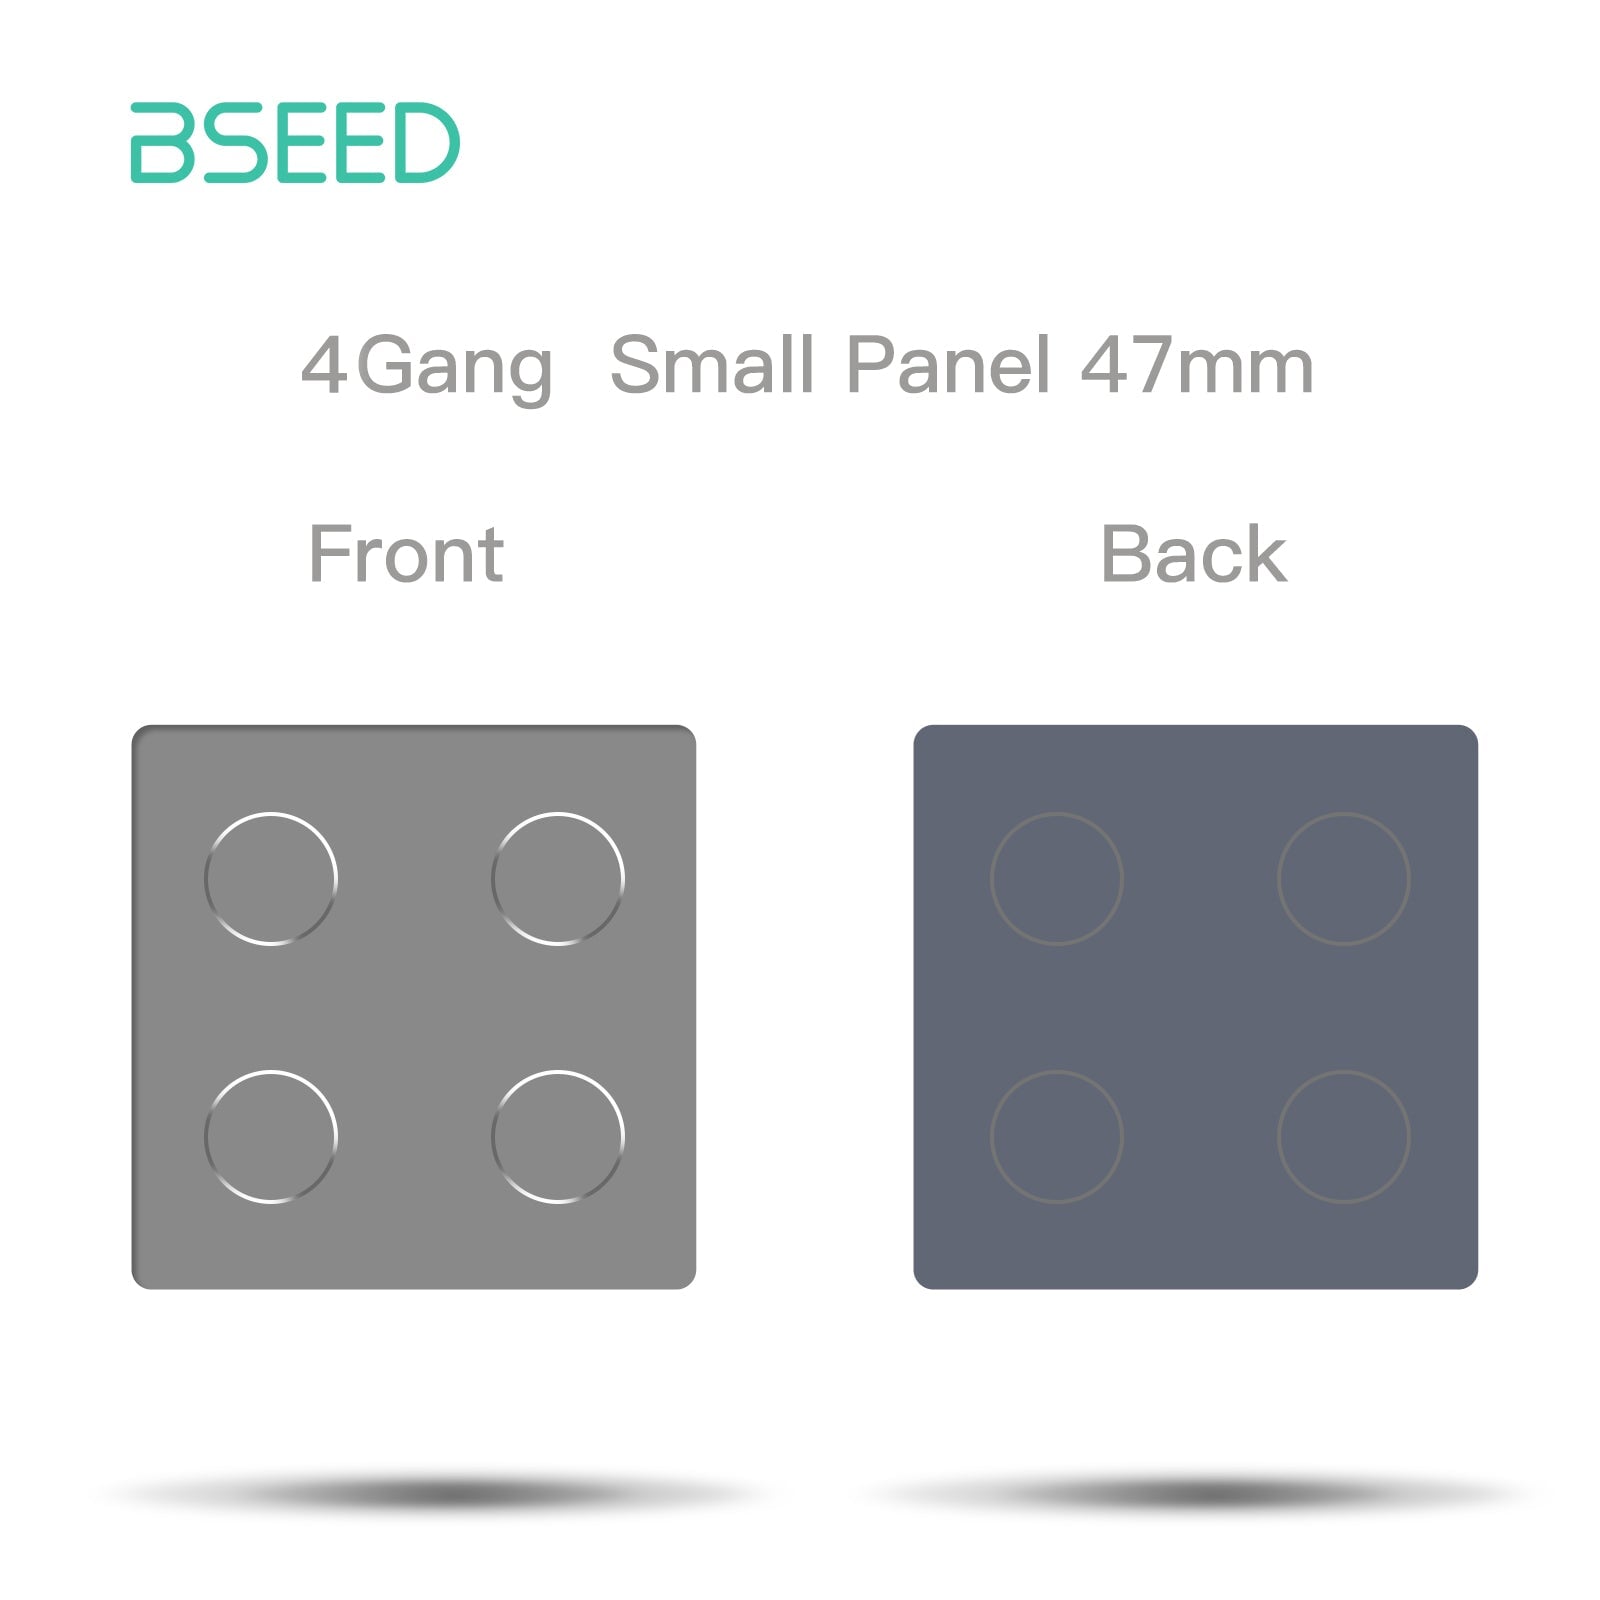 Bseed 47mm Glass Panel Switch DIY Part With Or Without Icon Bseedswitch Grey Touch 4Gang Switch icon Panel 